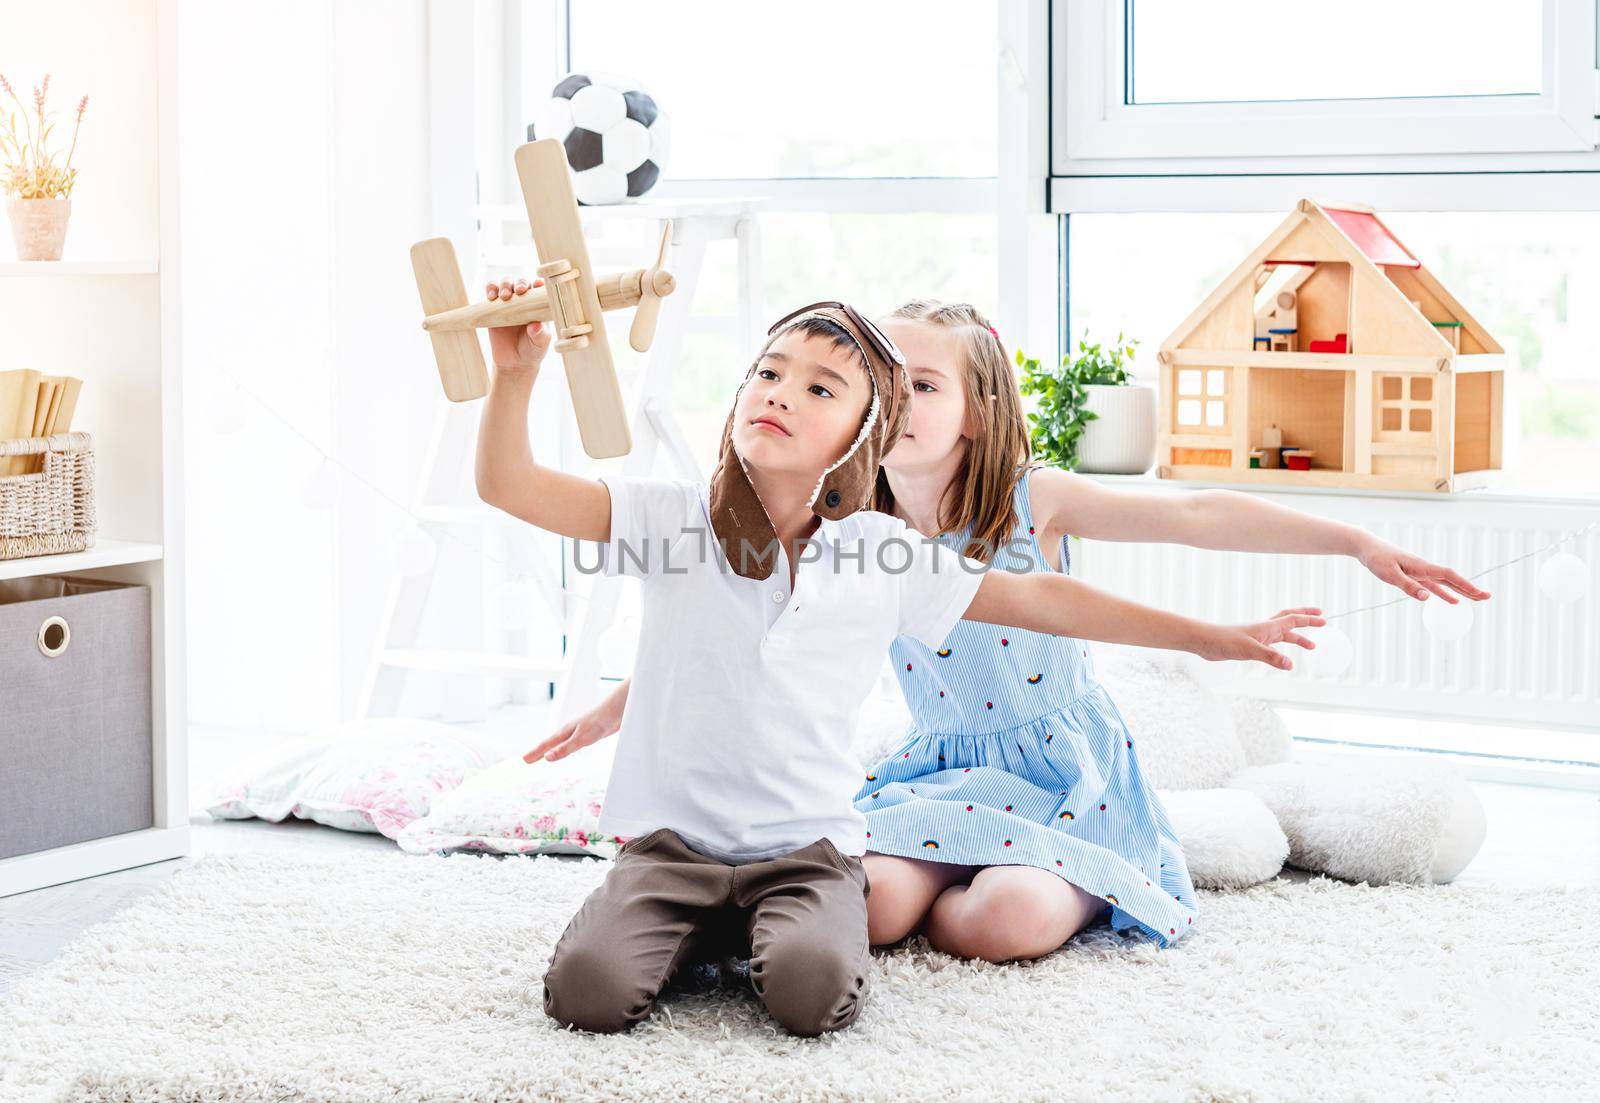 Happy kids playing with plane model sitting in light room